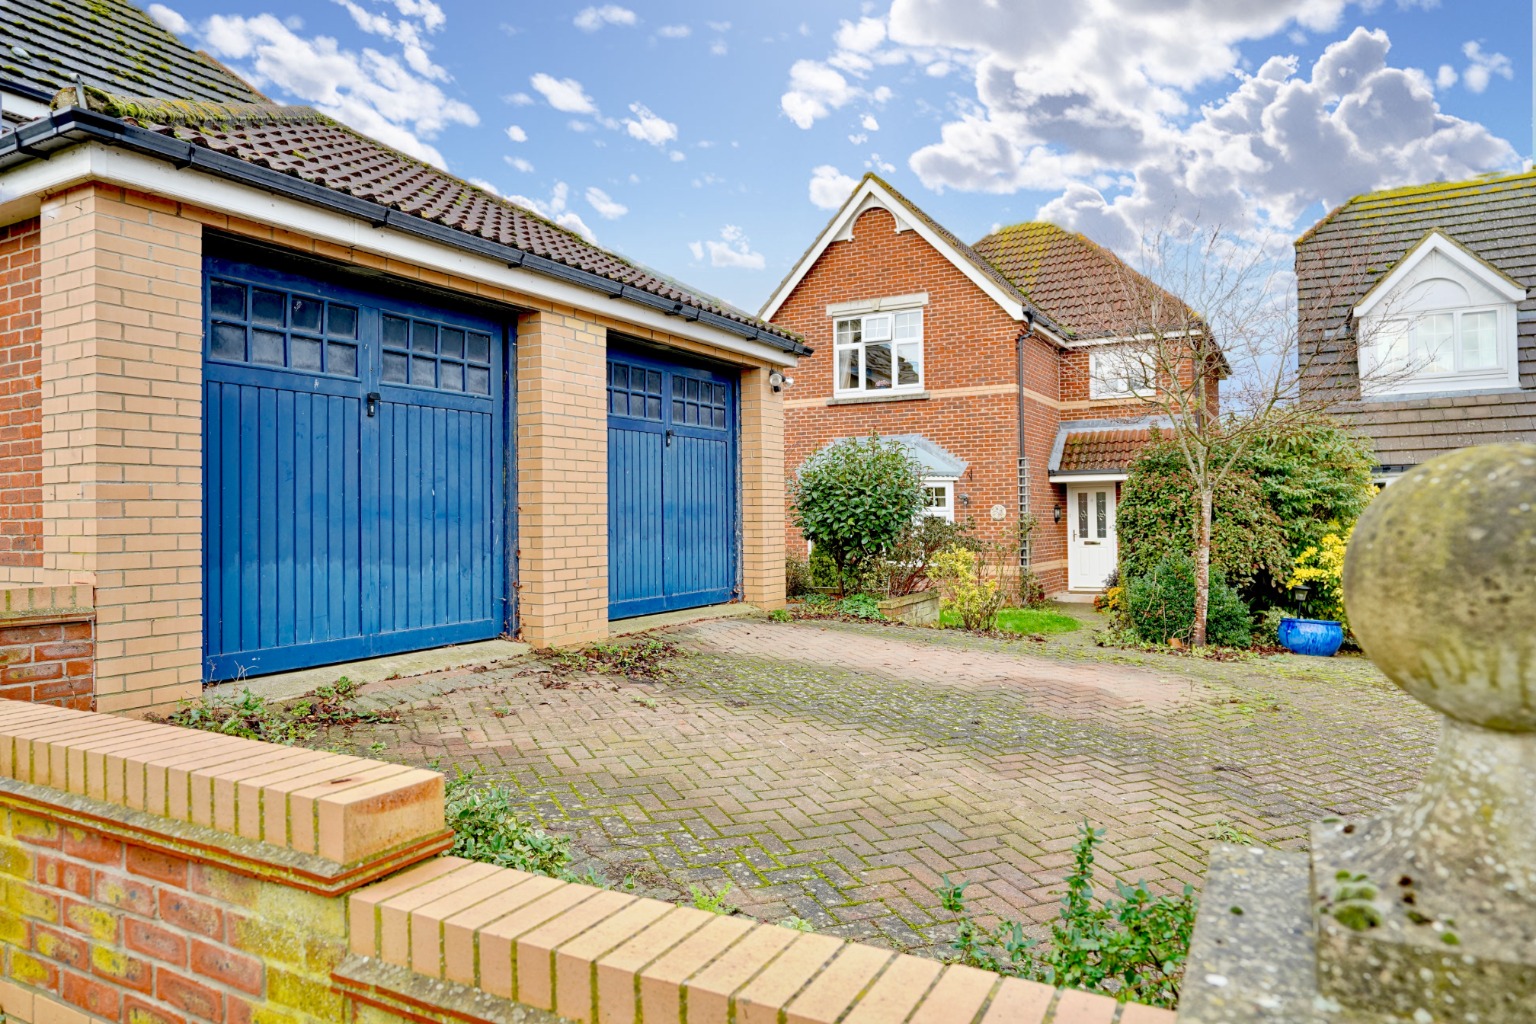 4 bed detached house for sale in Sumerling Way, Huntingdon  - Property Image 1